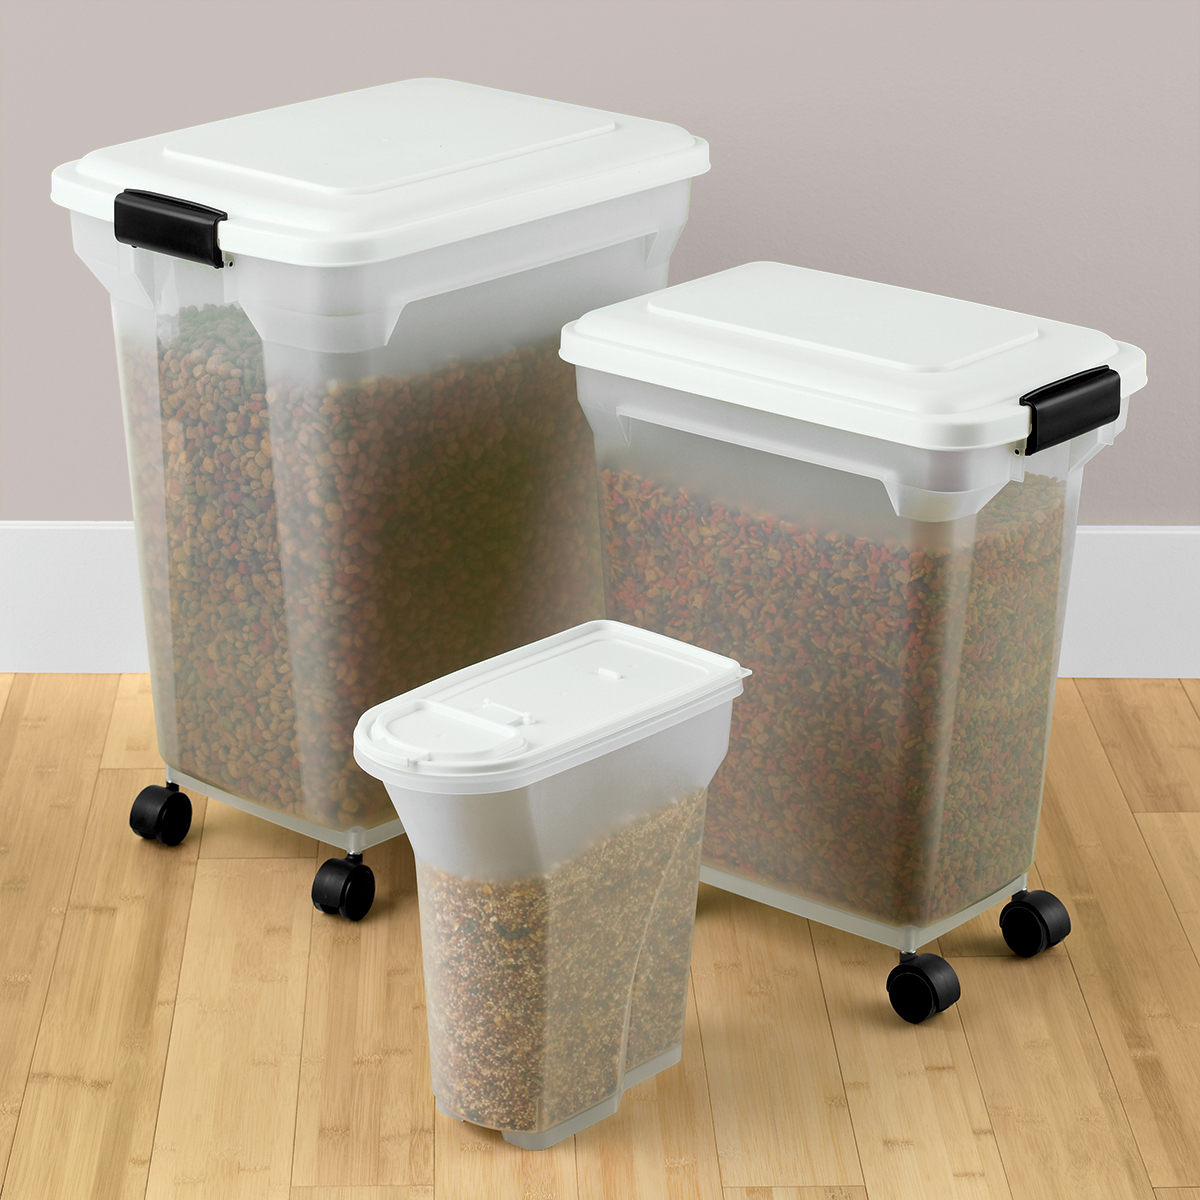 Iris Pet Food Containers | The 